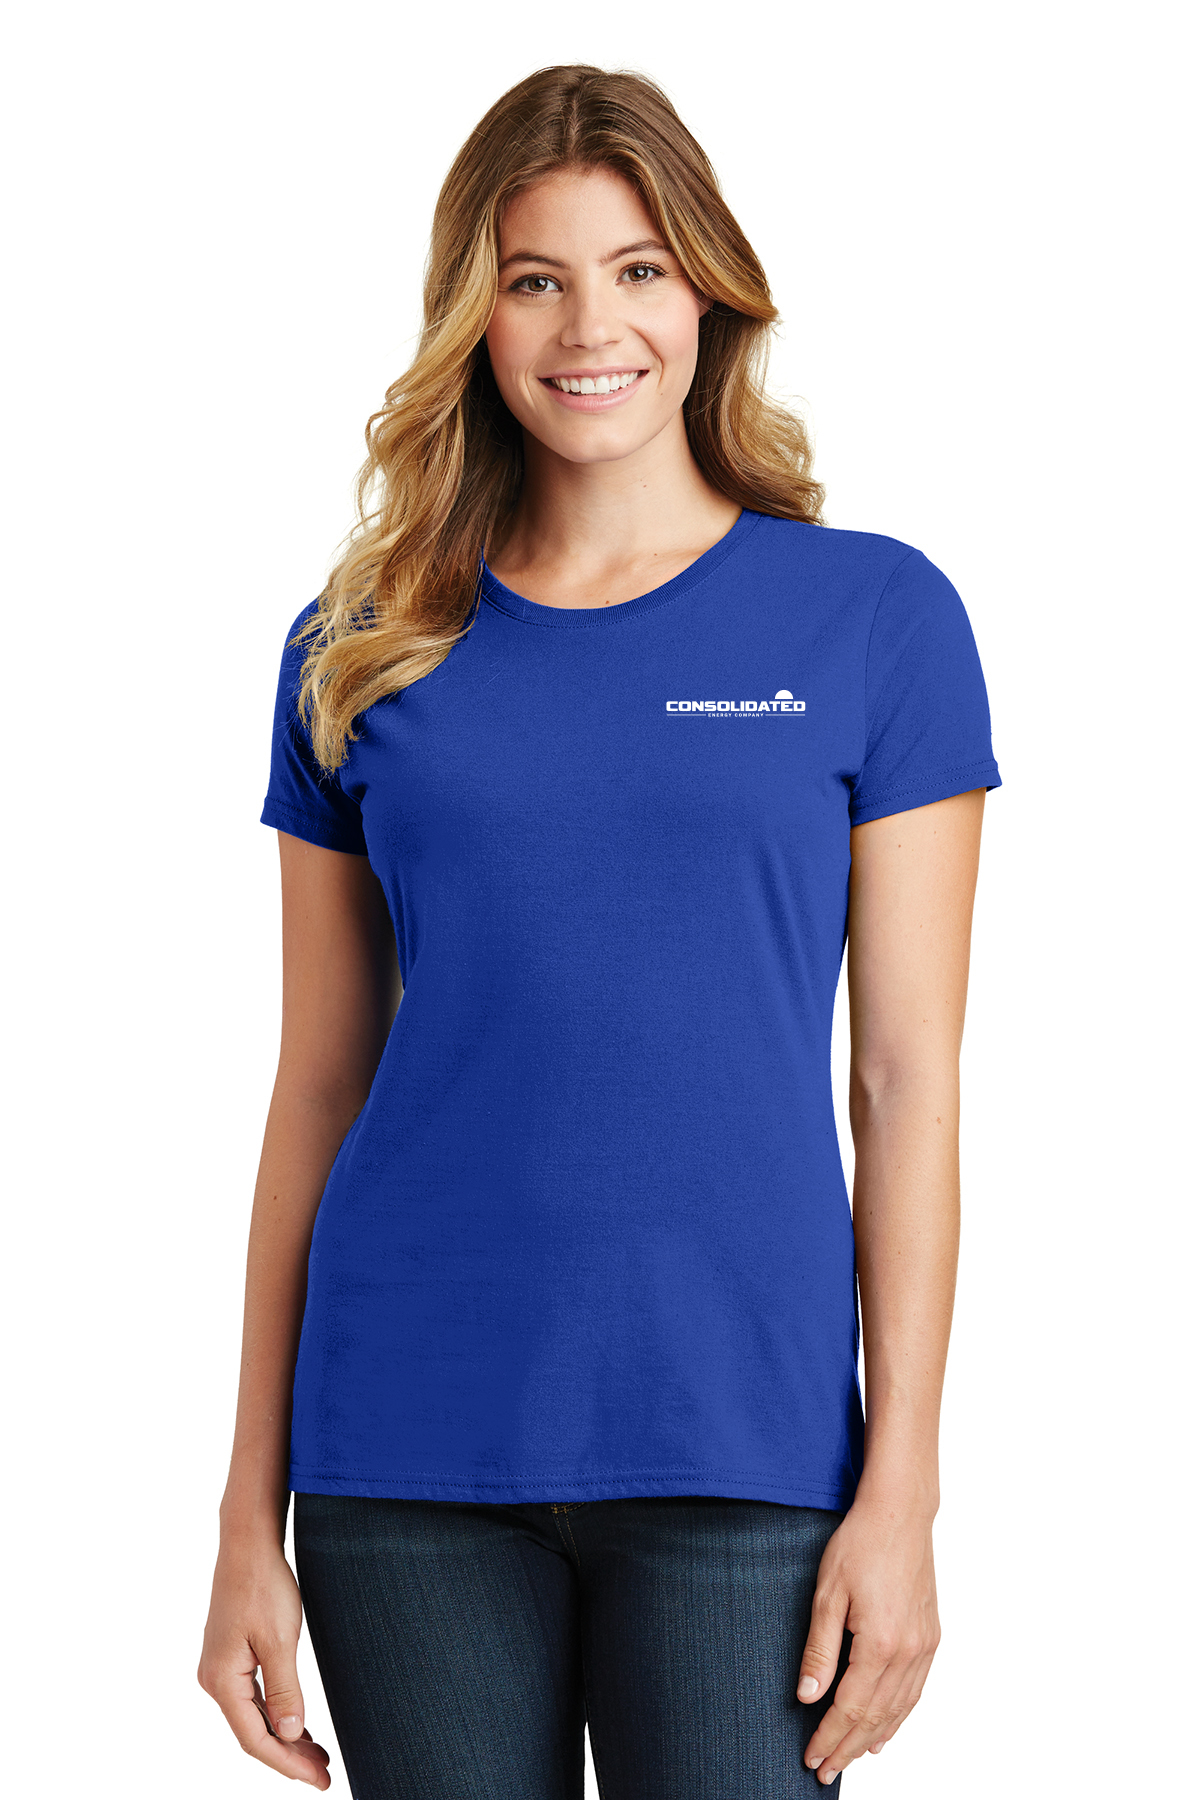 Consolidated Energy Company Ladies T-Shirt